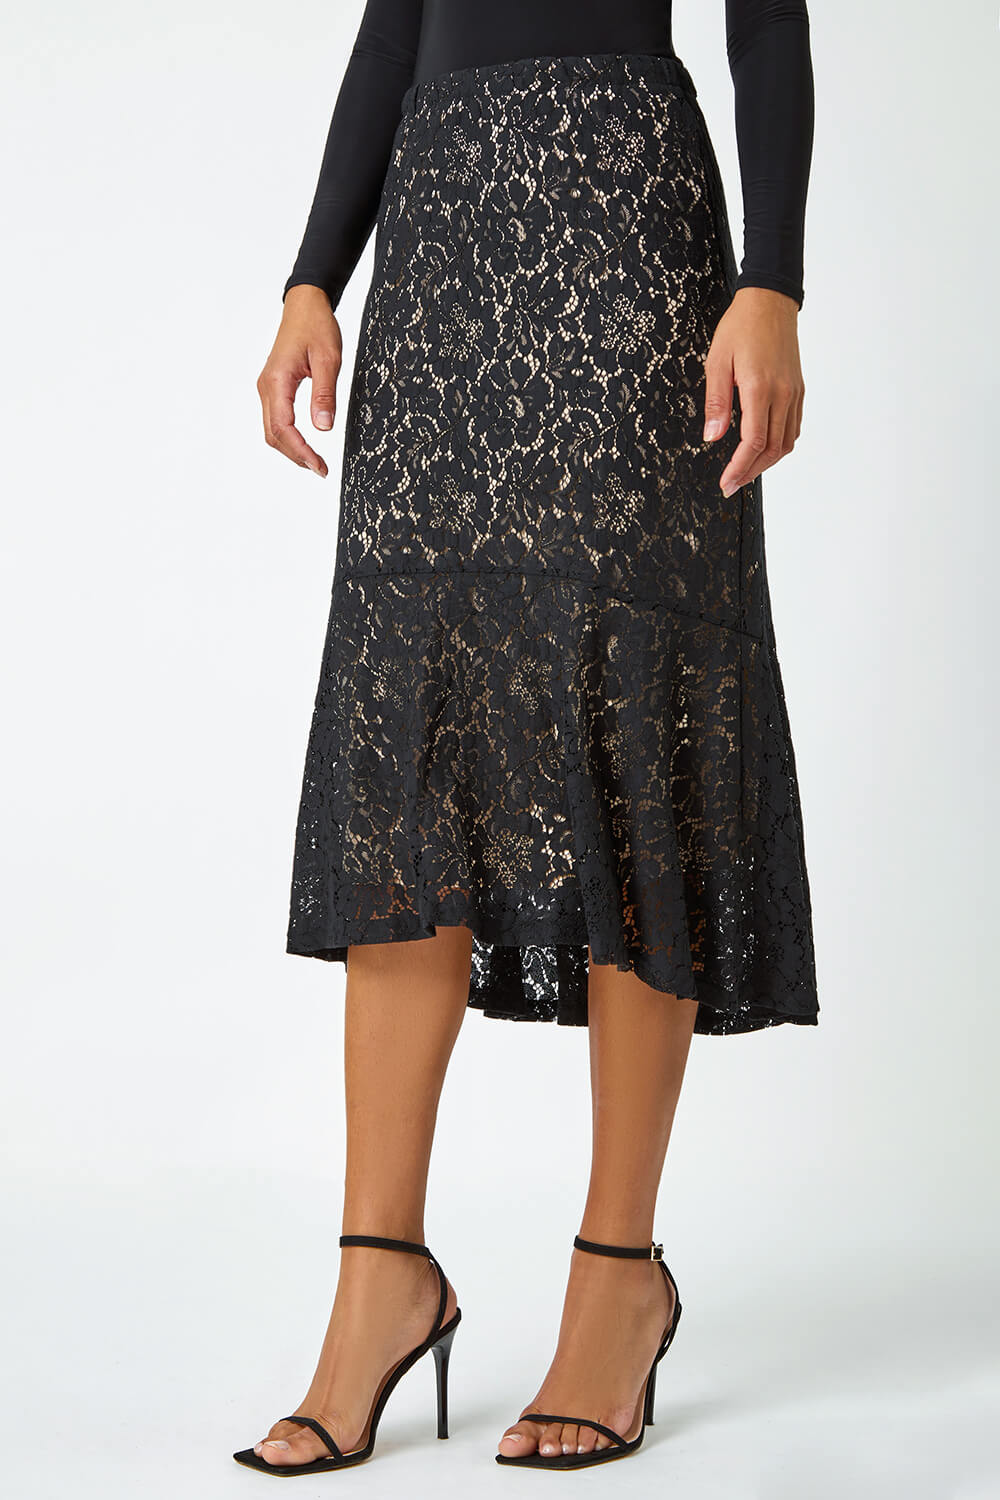 Black Cotton Blend Lace Stretch Skirt , Image 4 of 5